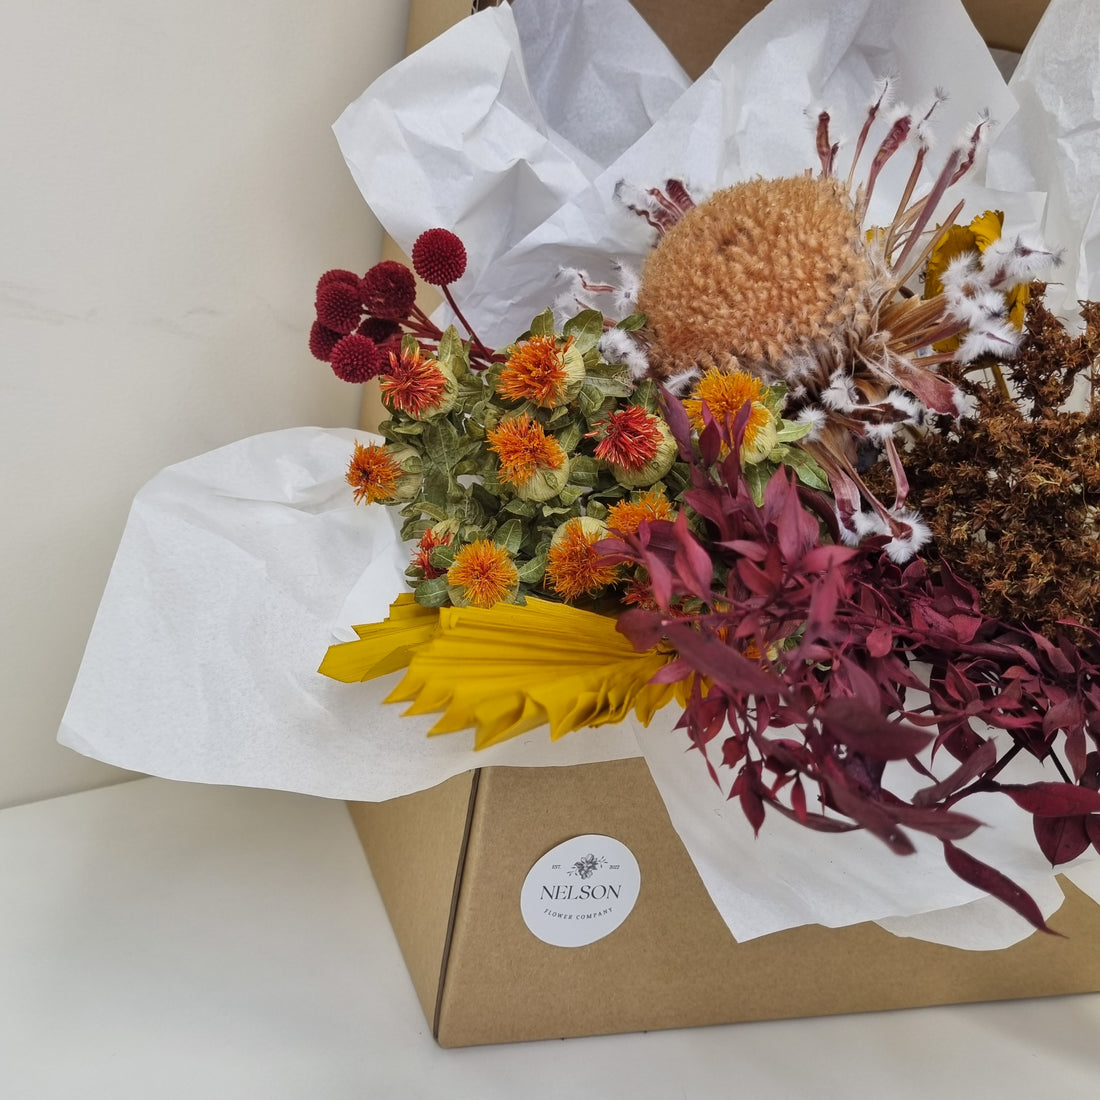 Autumnal Tones Dried Flower Box in cardboard box with white tissue paper.